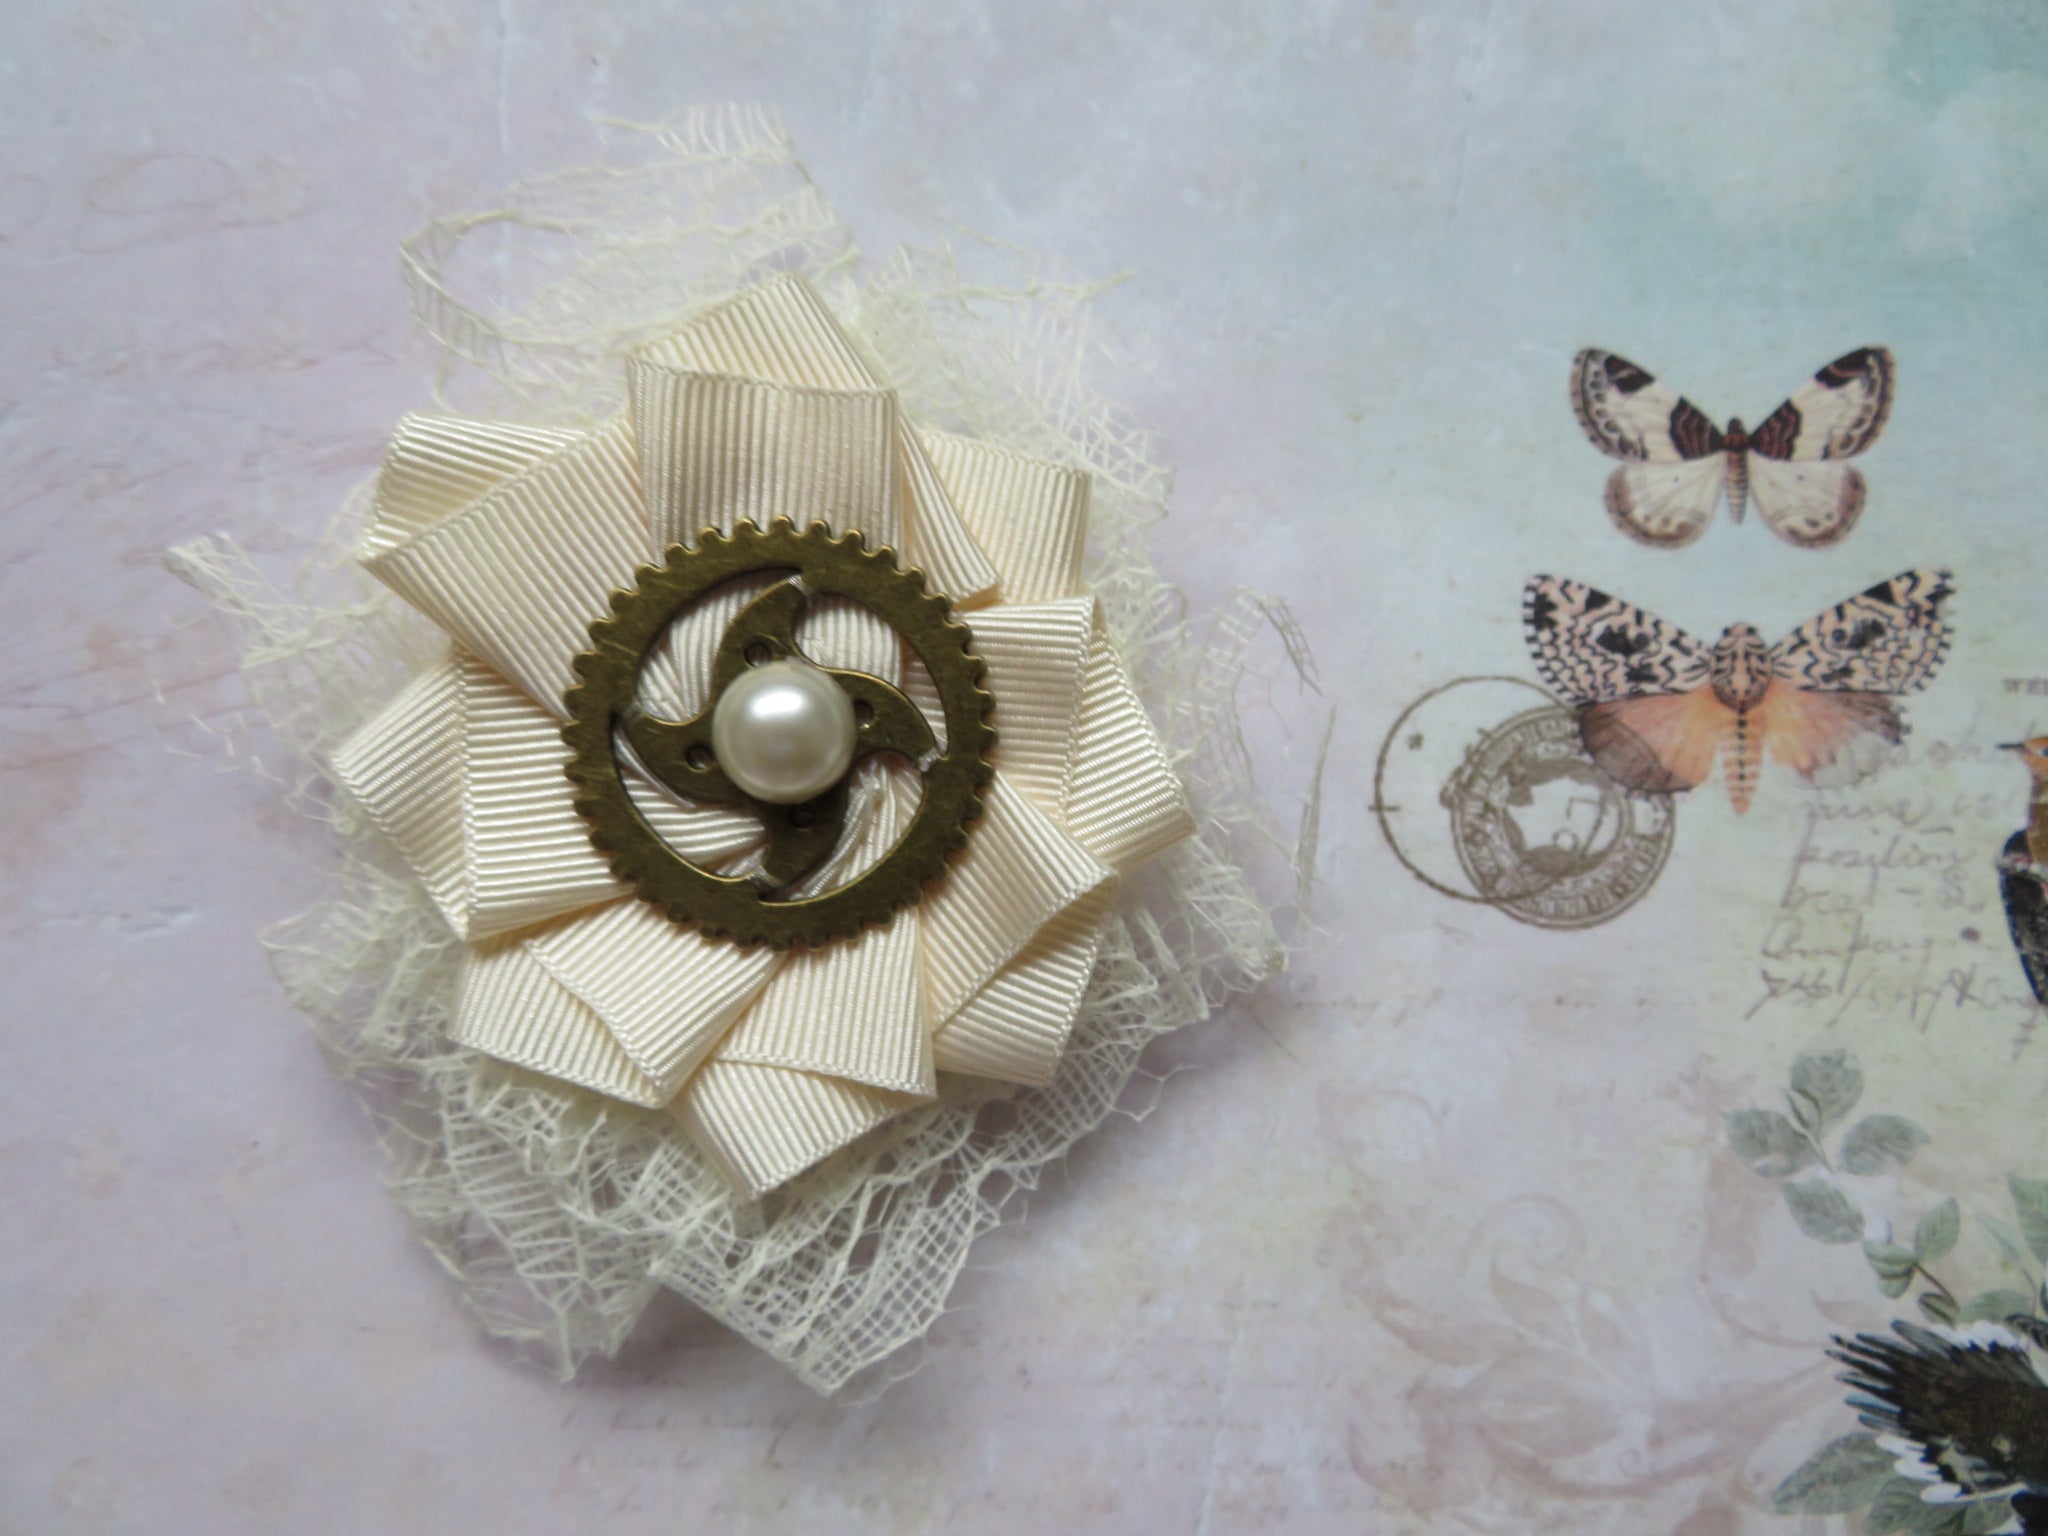 small brooch made with cream ribbed grosgrain ribbon handmade in a ruffle shape, with cream lace ruffle backing it large brass steampunk watch cog in the centre with a cream pearl in the centre to finish fixed with a roll pin brooch fixing at the back perfect for a steampunk wedding